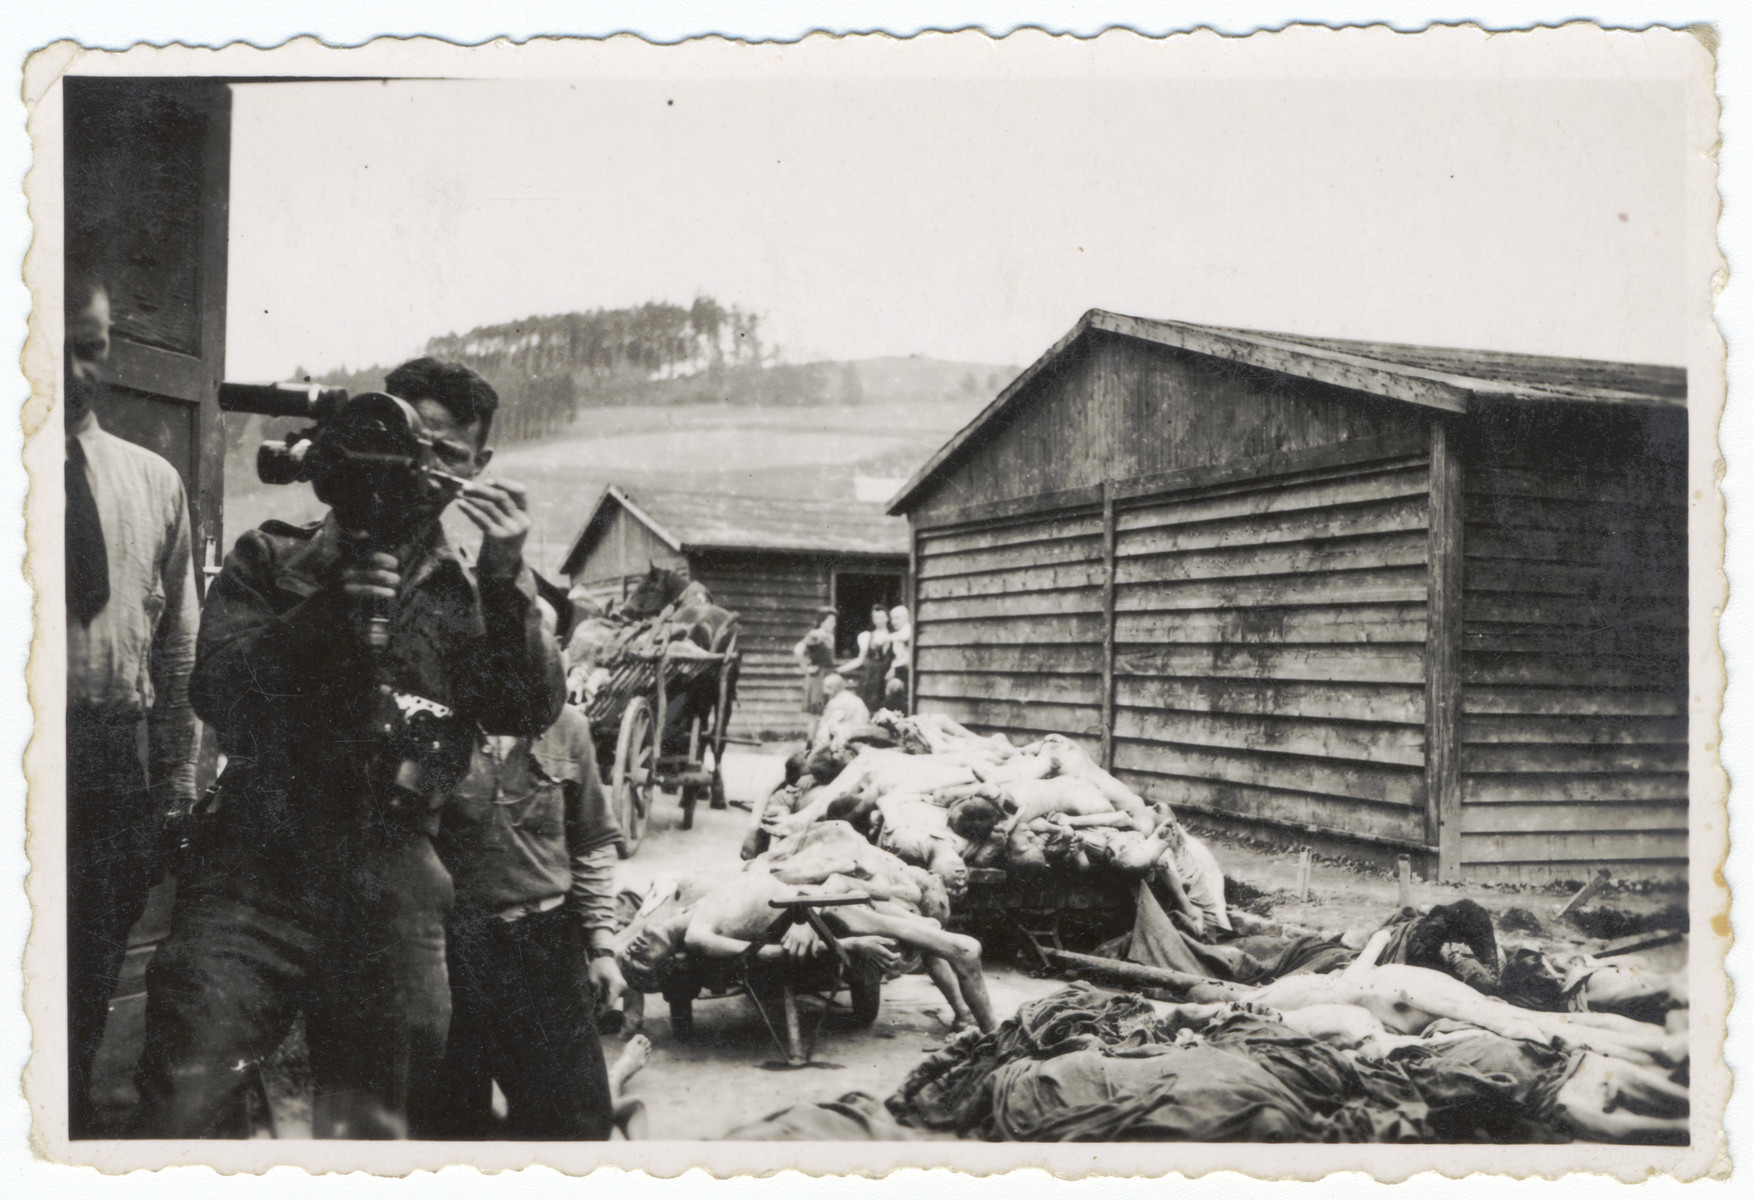 An American signal corps photographer films the clearing of piles of corpses in the Gusen concentration camp.